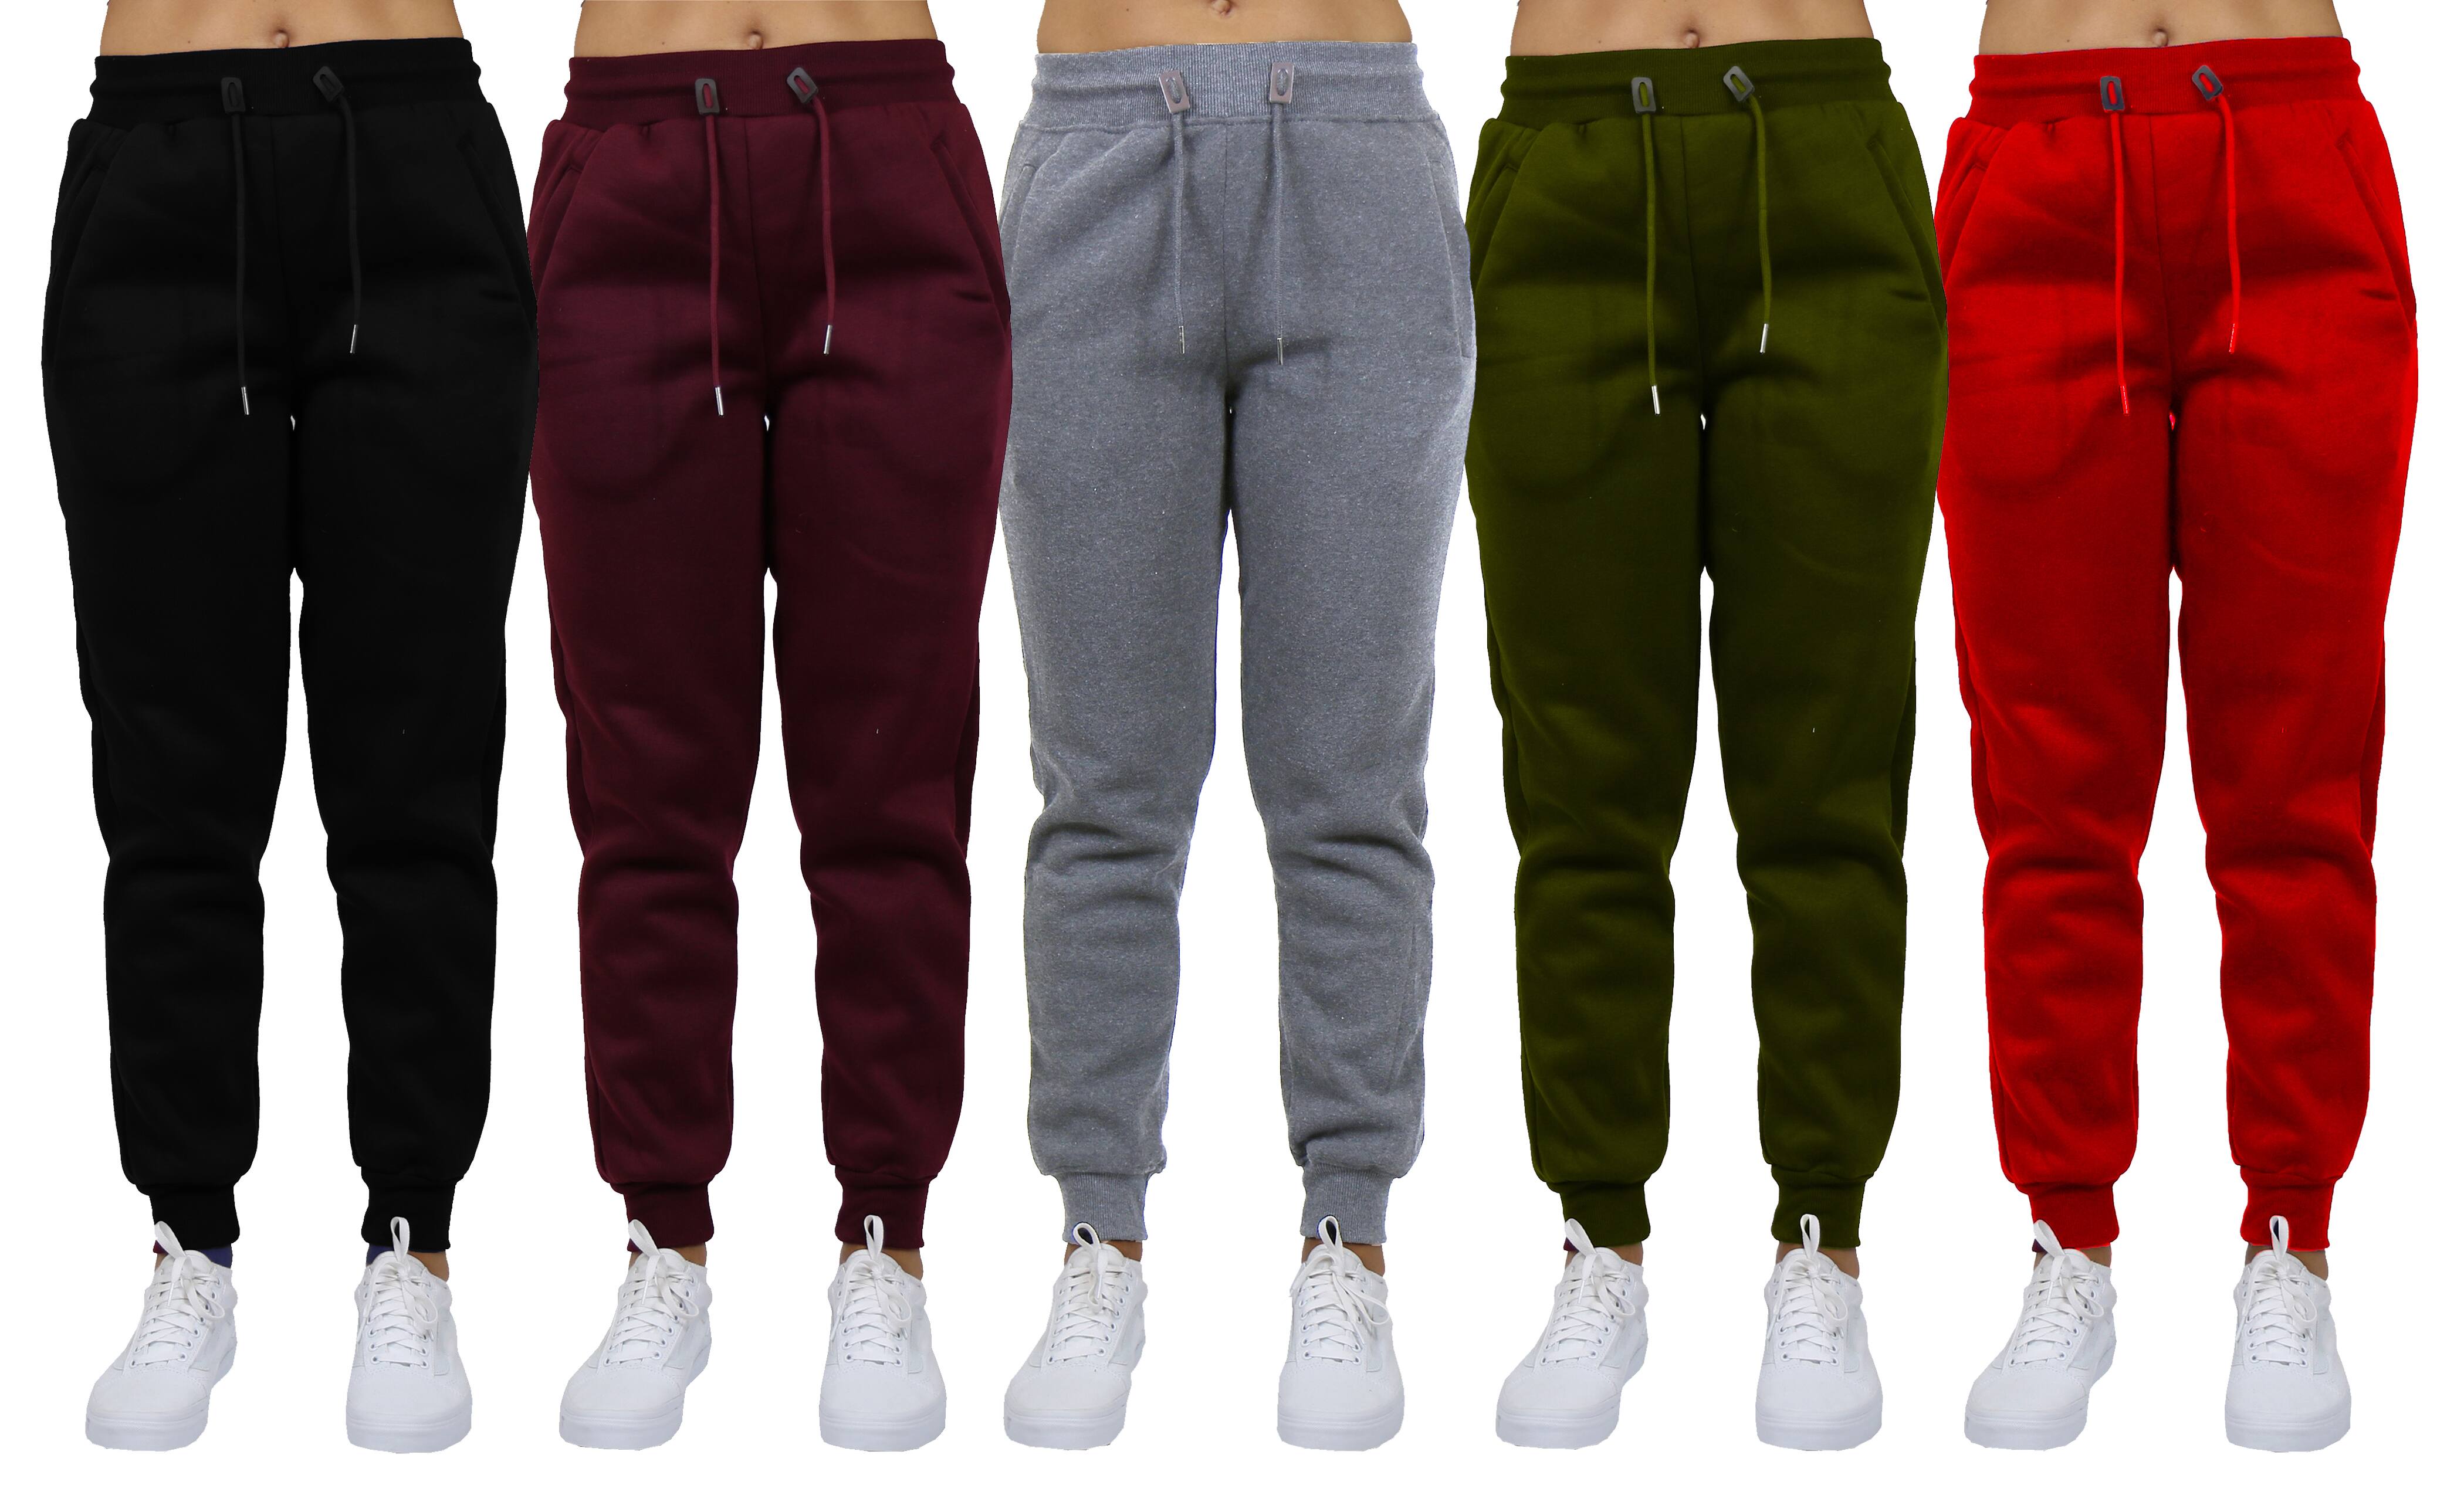 Galaxy by Harvic Women's Relaxed Fit Fleece-Lined Jogger Sweatpants 5 Pack